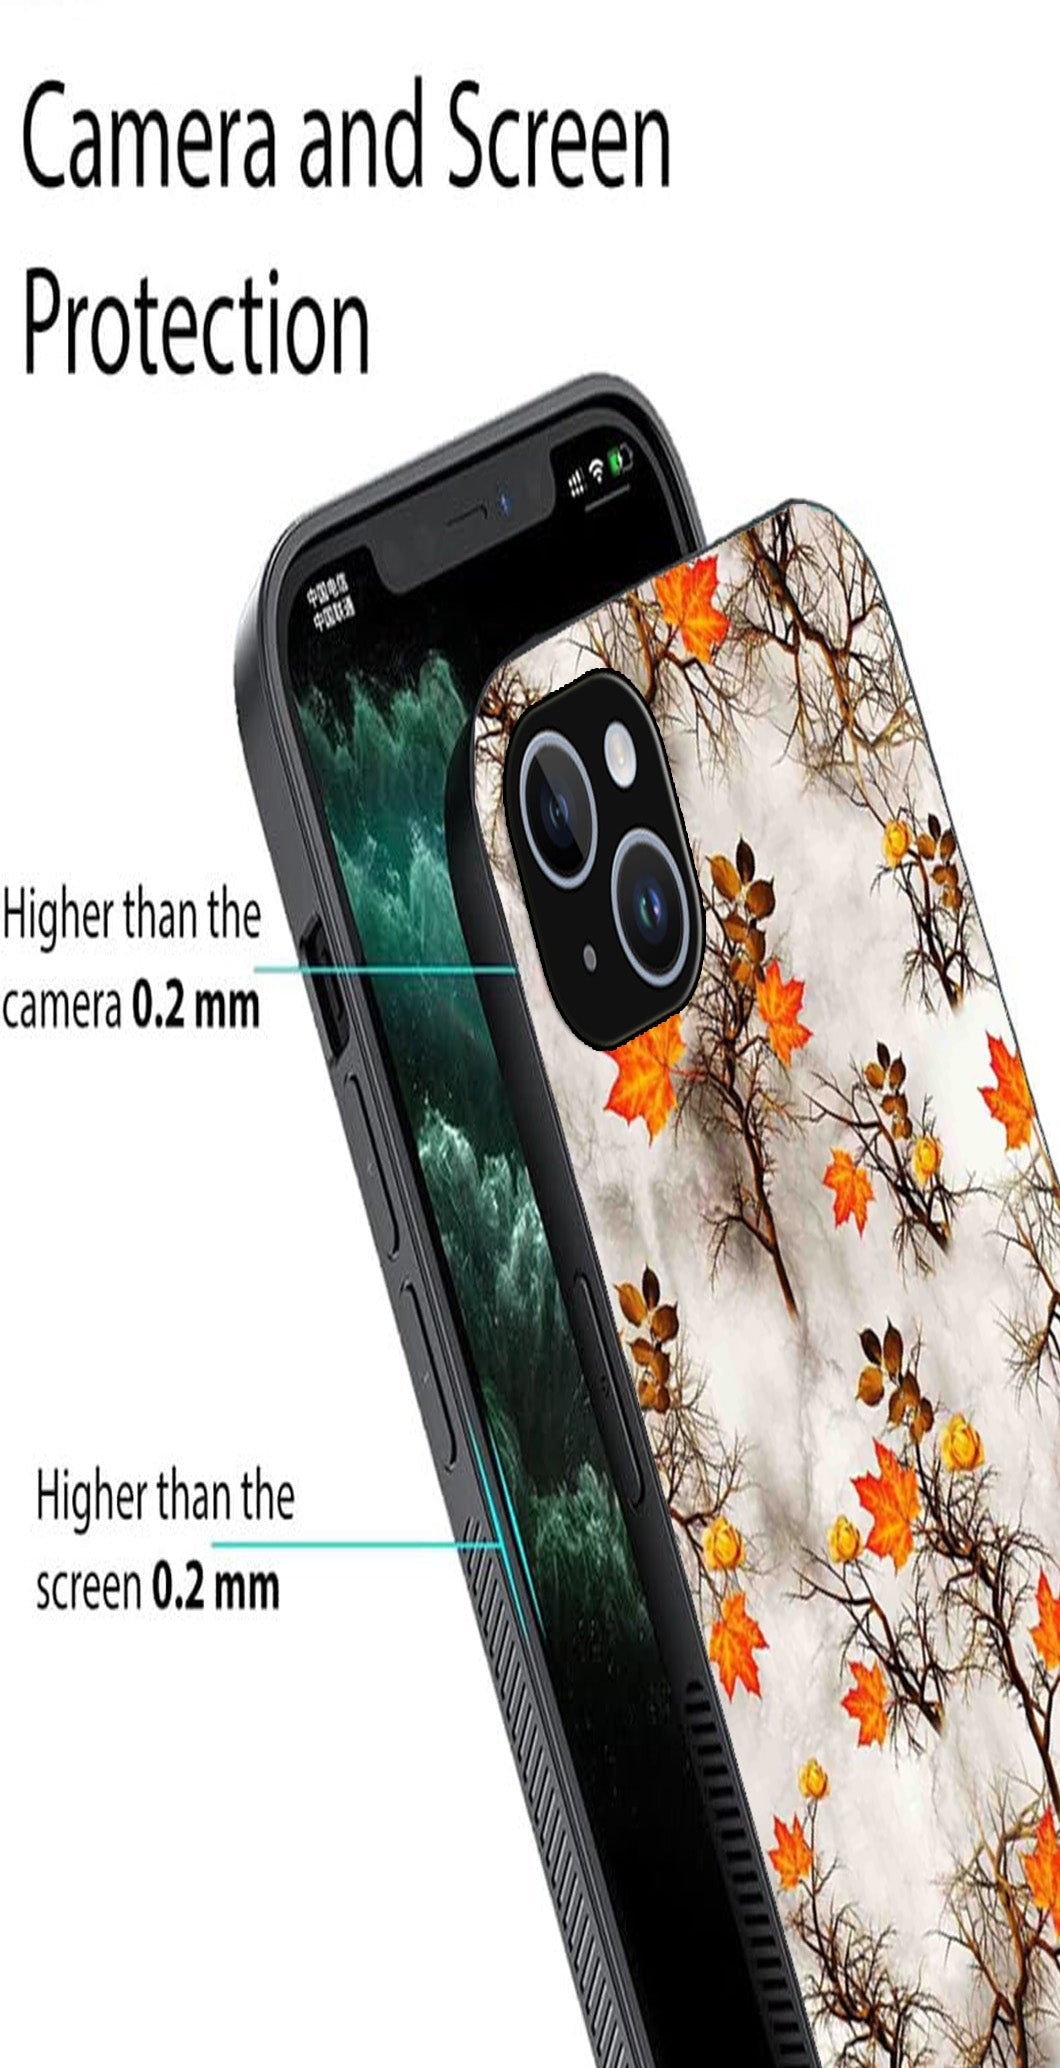 Autumn leaves Metal Mobile Case for iPhone 13